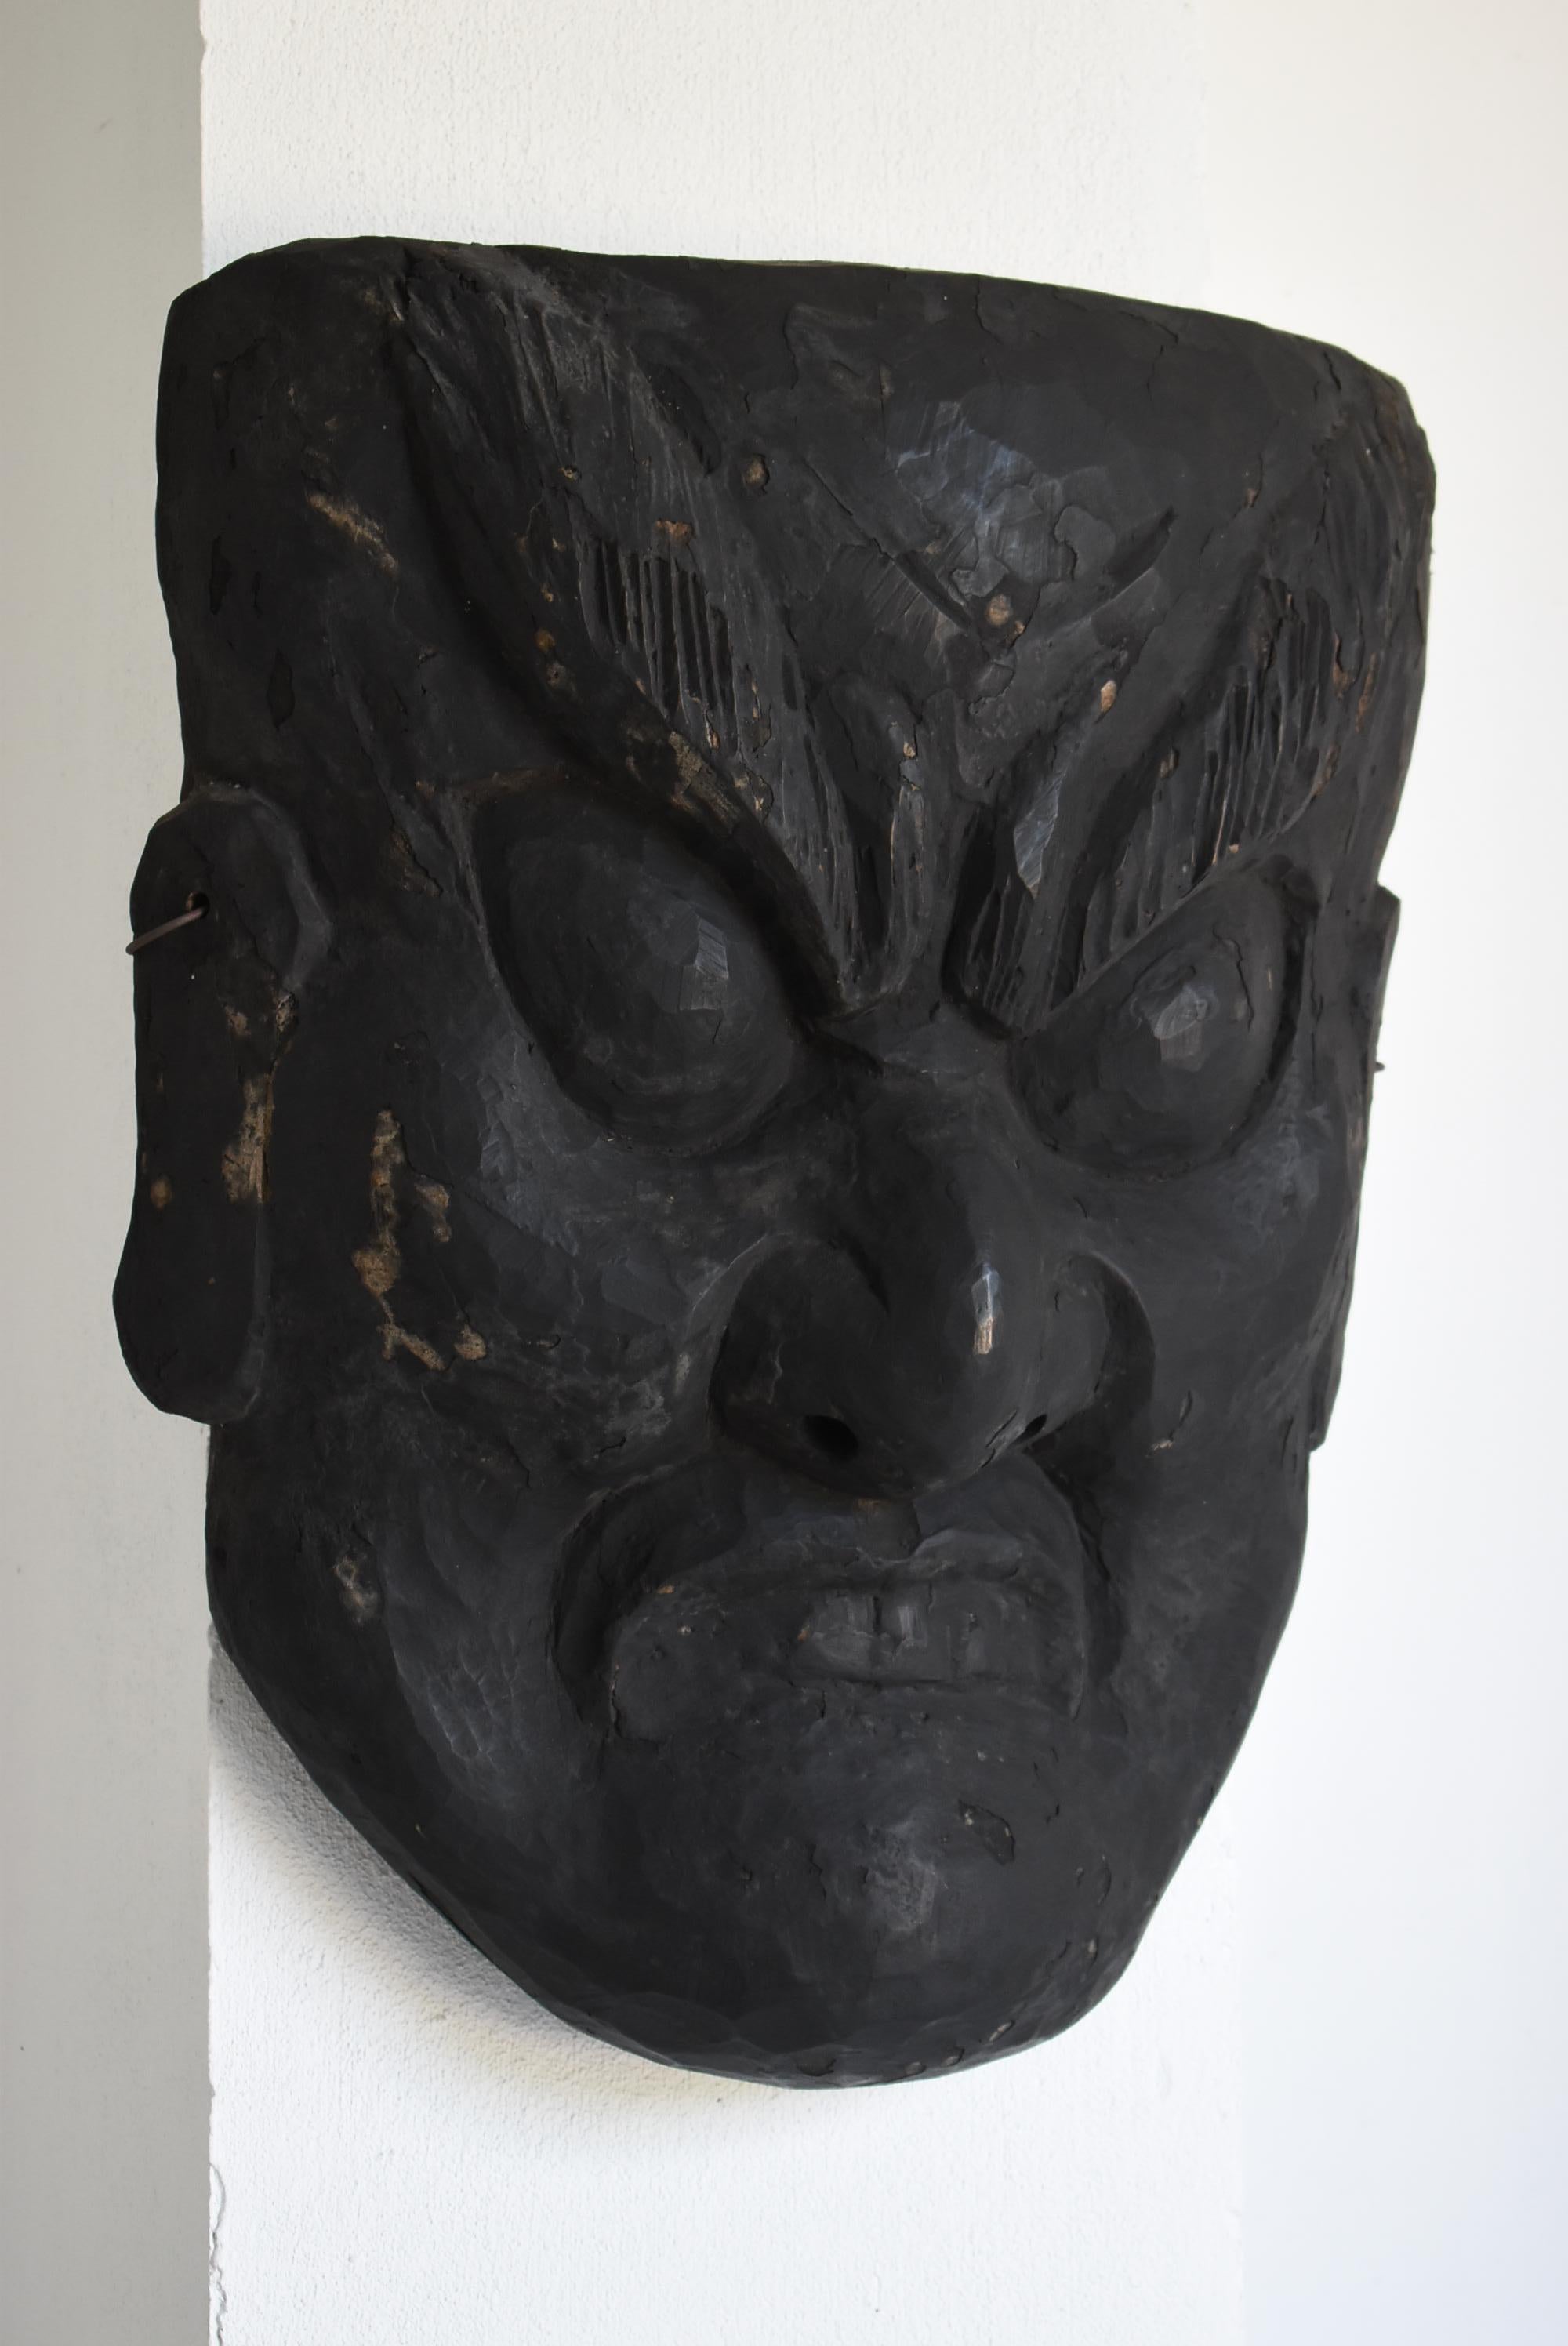 This is a very old Japanese wooden mask.
In Japan, it is called 